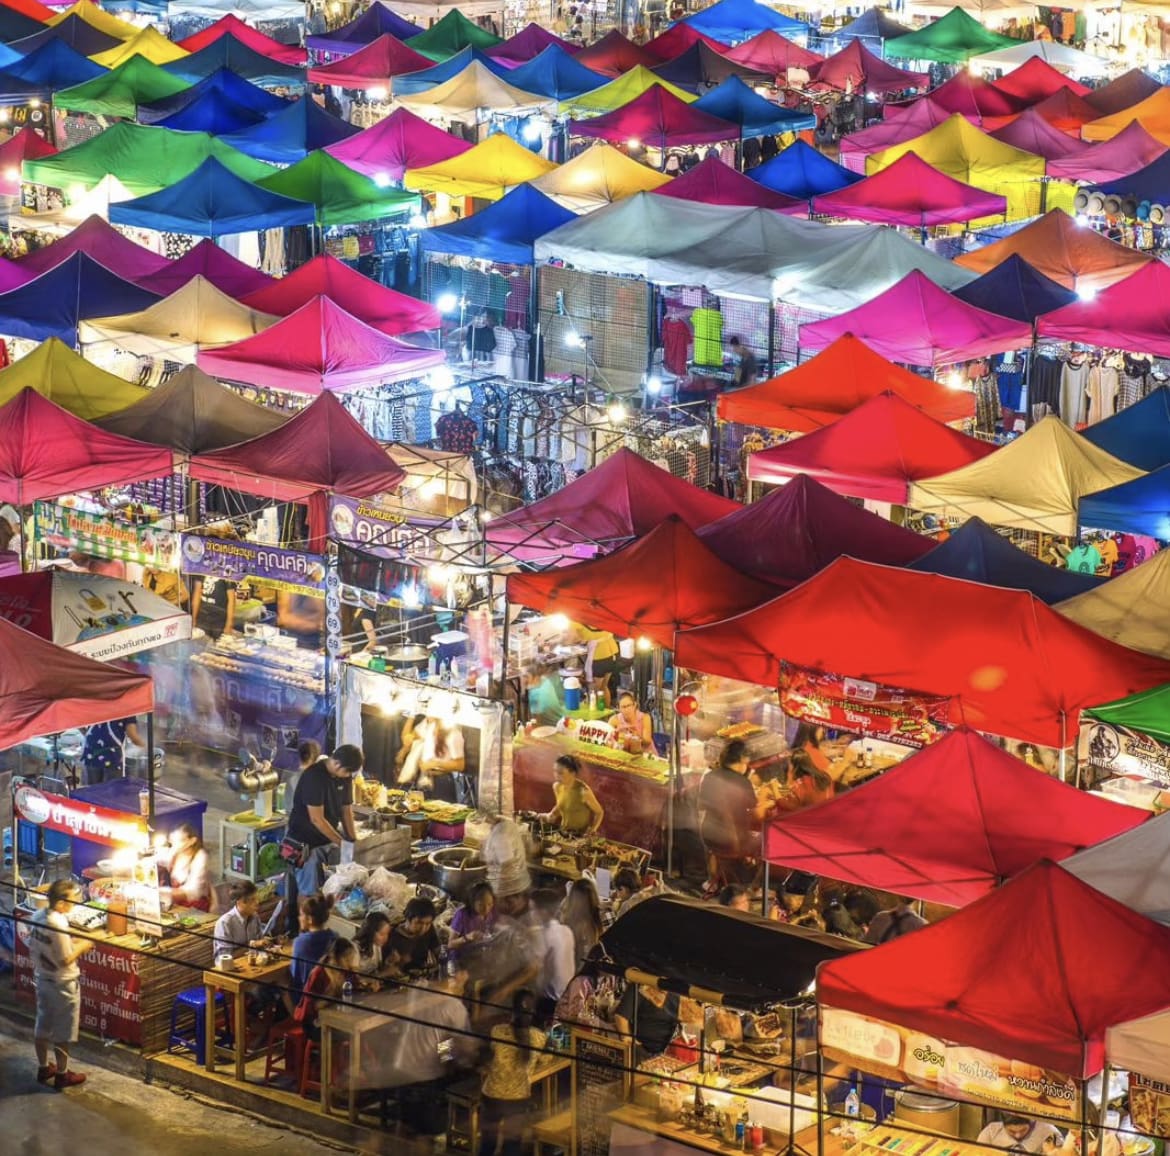 Chatuchak Weekend Market - The 20 Best Things to Do in Bangkok, Thailand